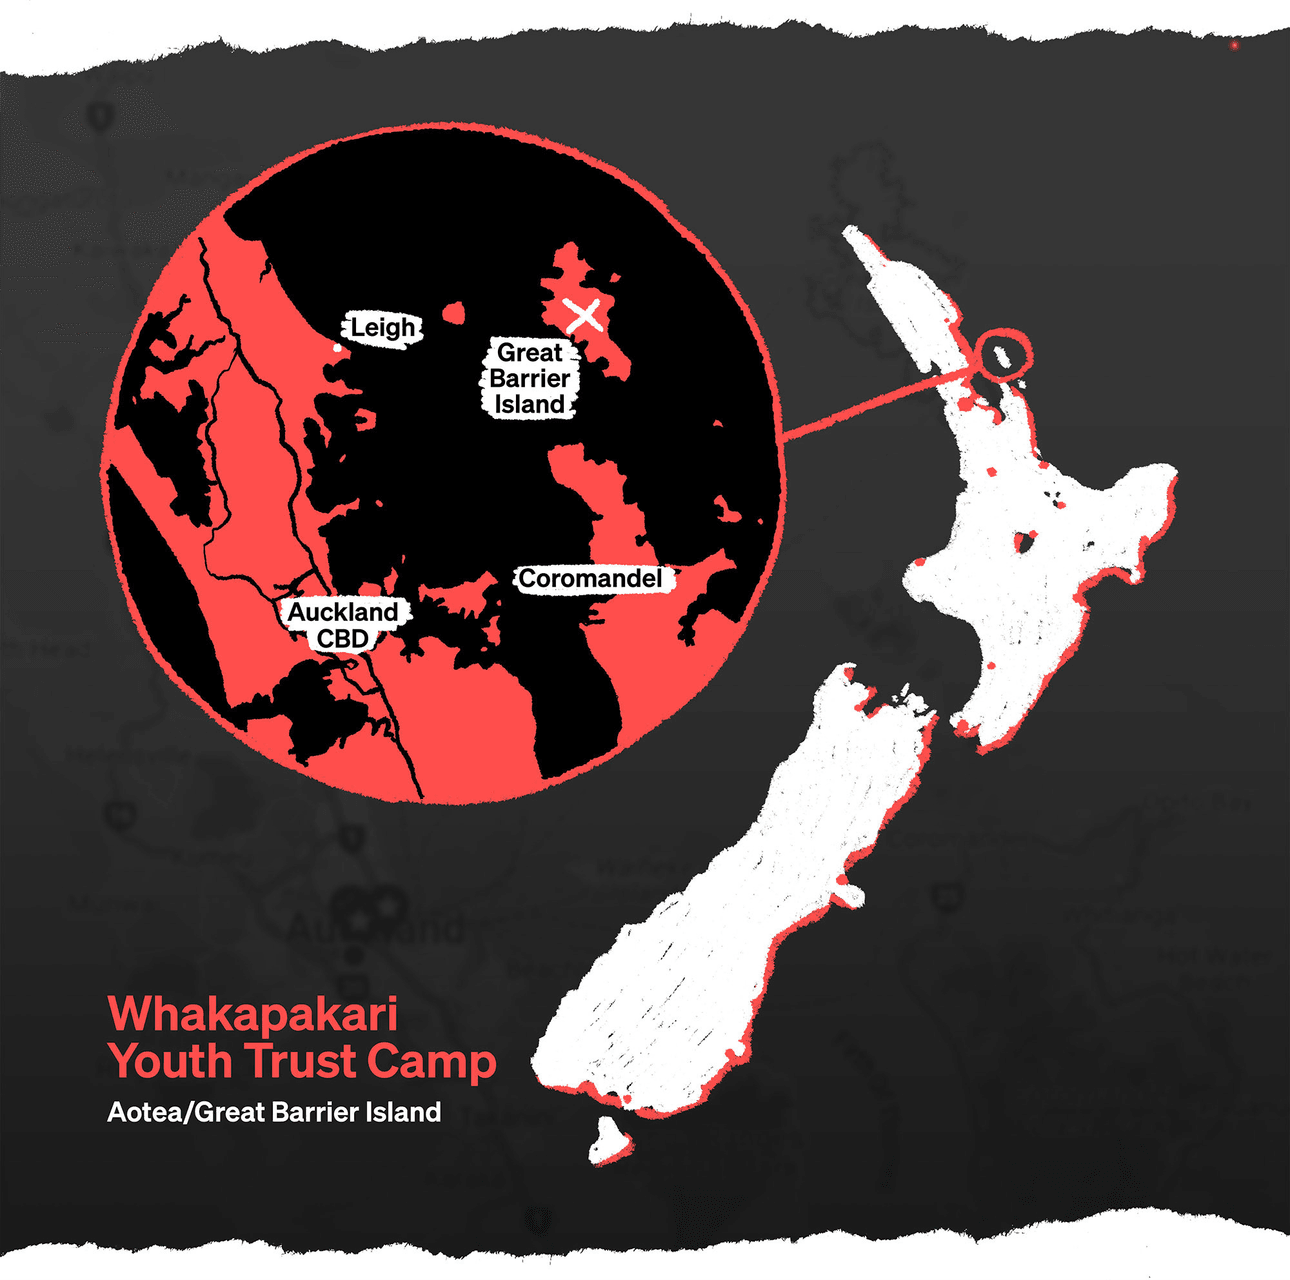 A map showing where Great Barrier Island is, off the coast of Auckland.